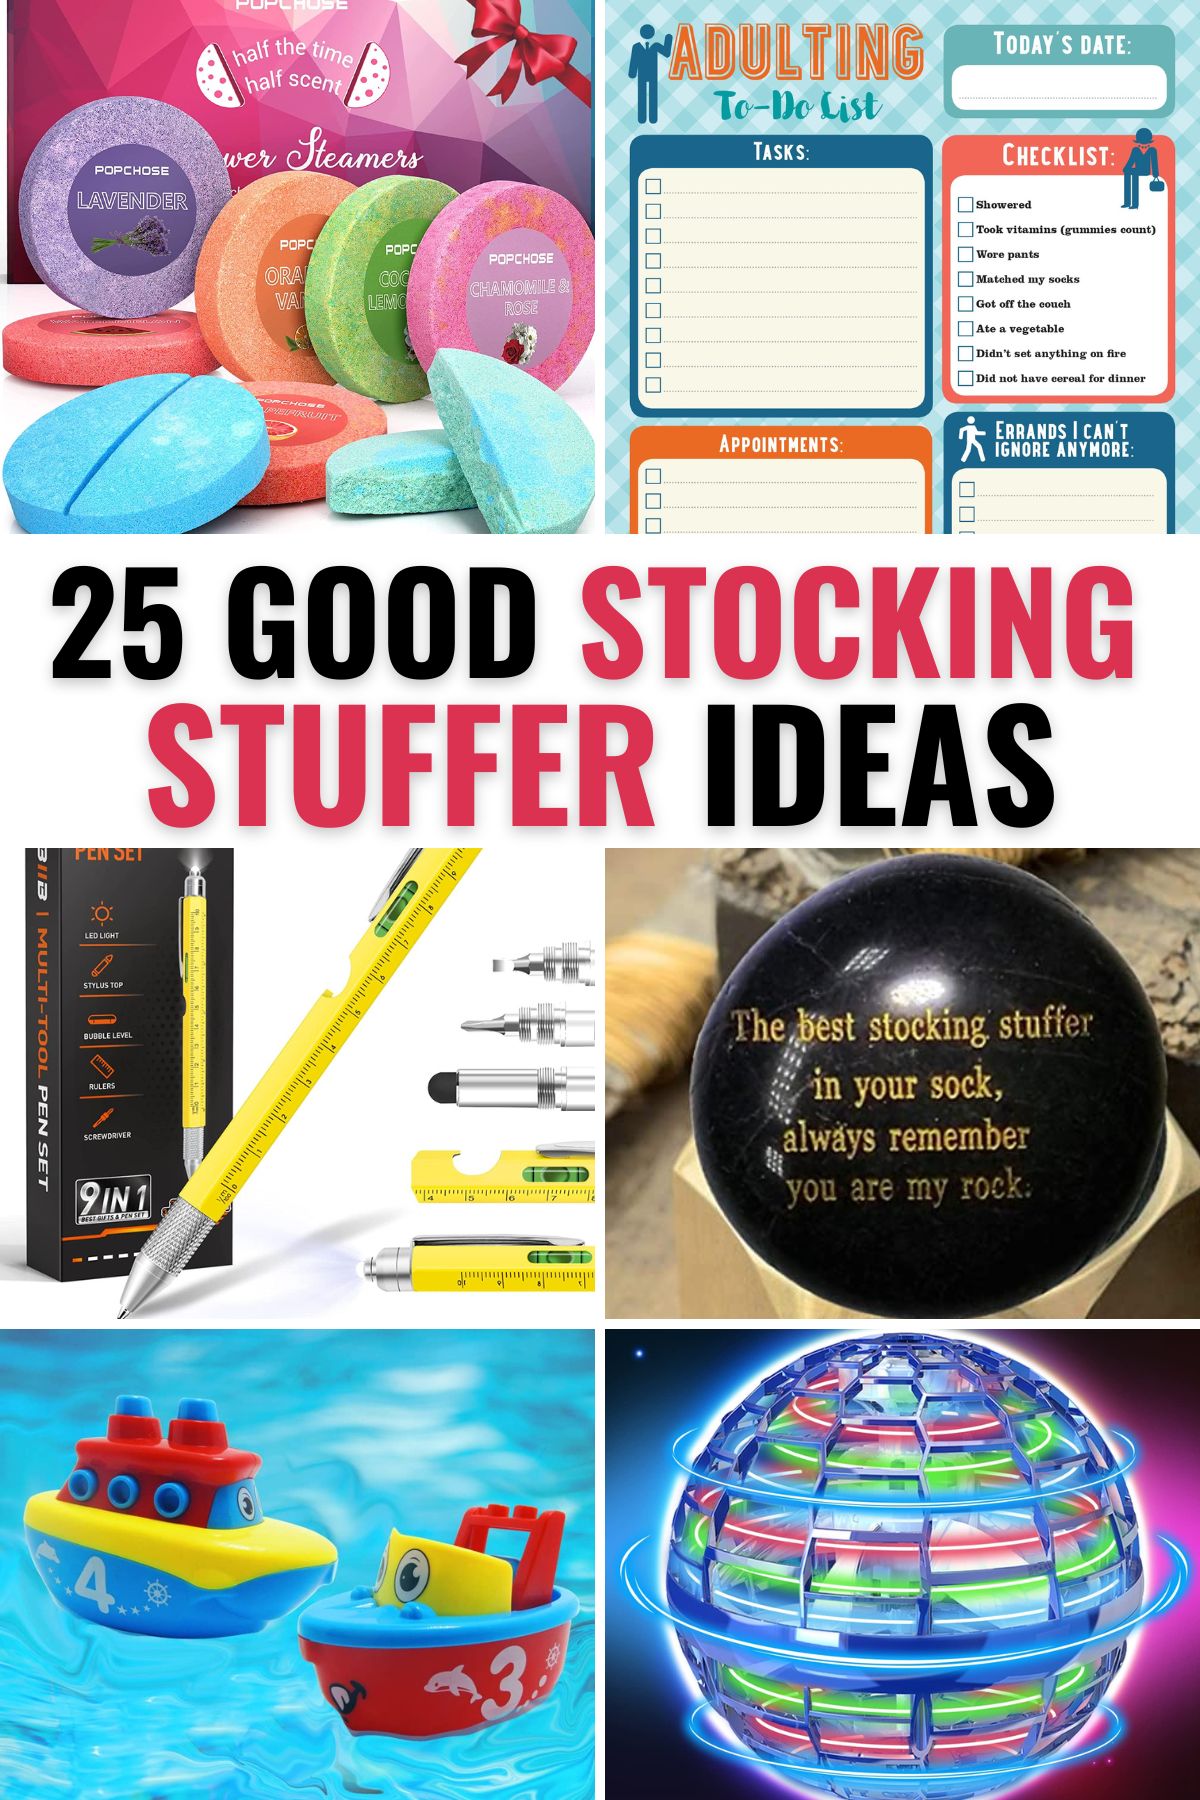 The Best Stocking Stuffer Ideas For Families with Teens